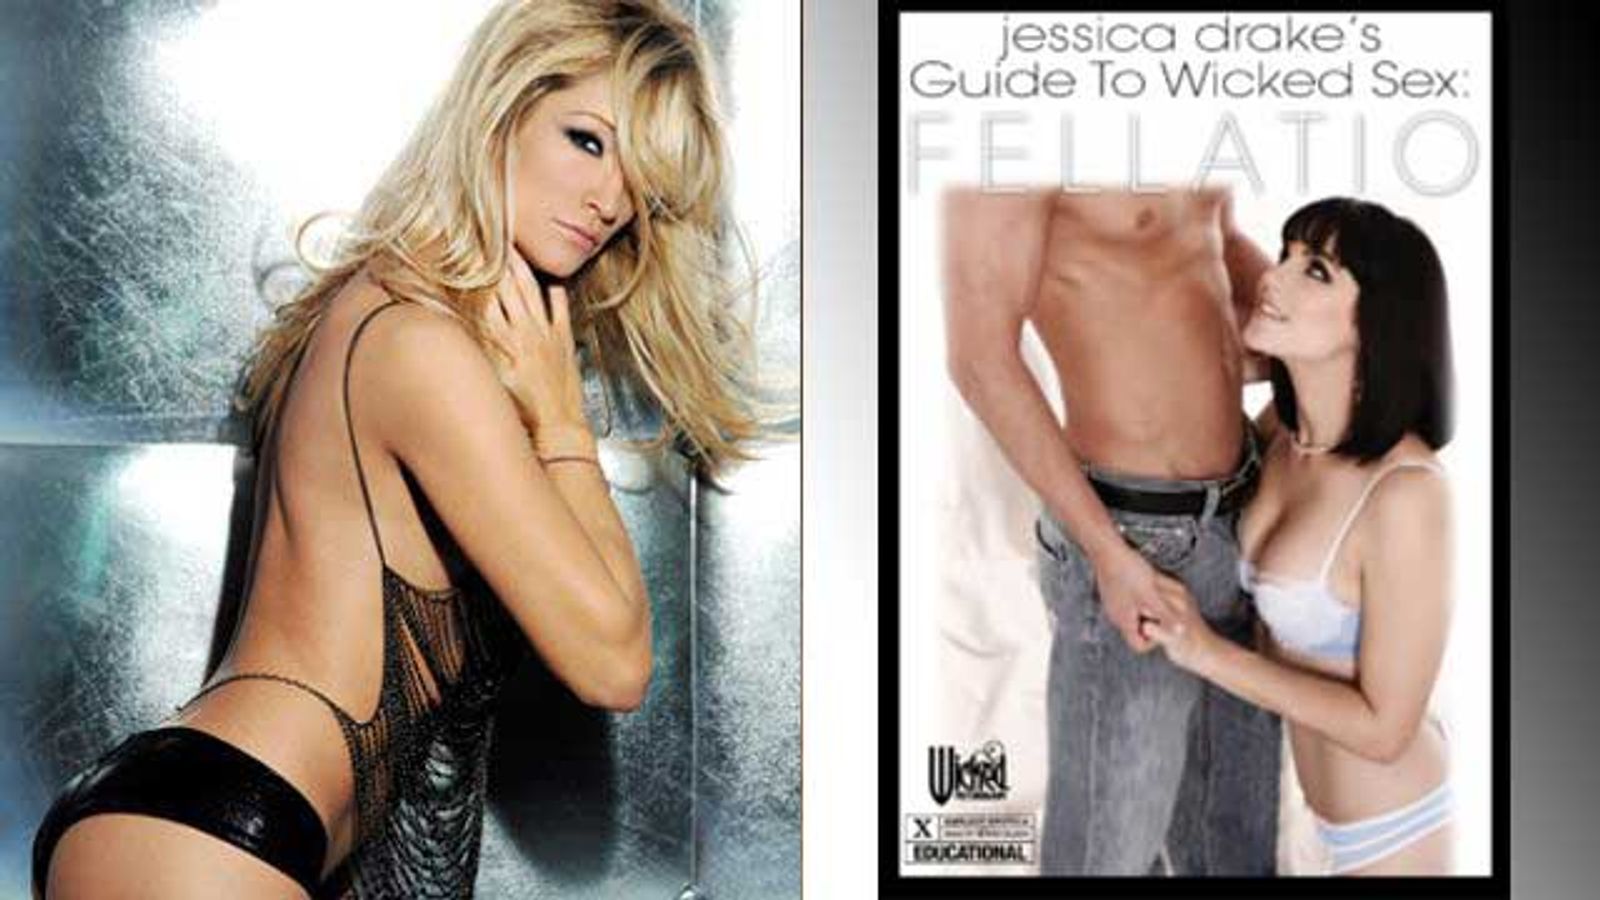 'Jessica Drake's Guide To Wicked Sex: Fellatio' Draws Raves